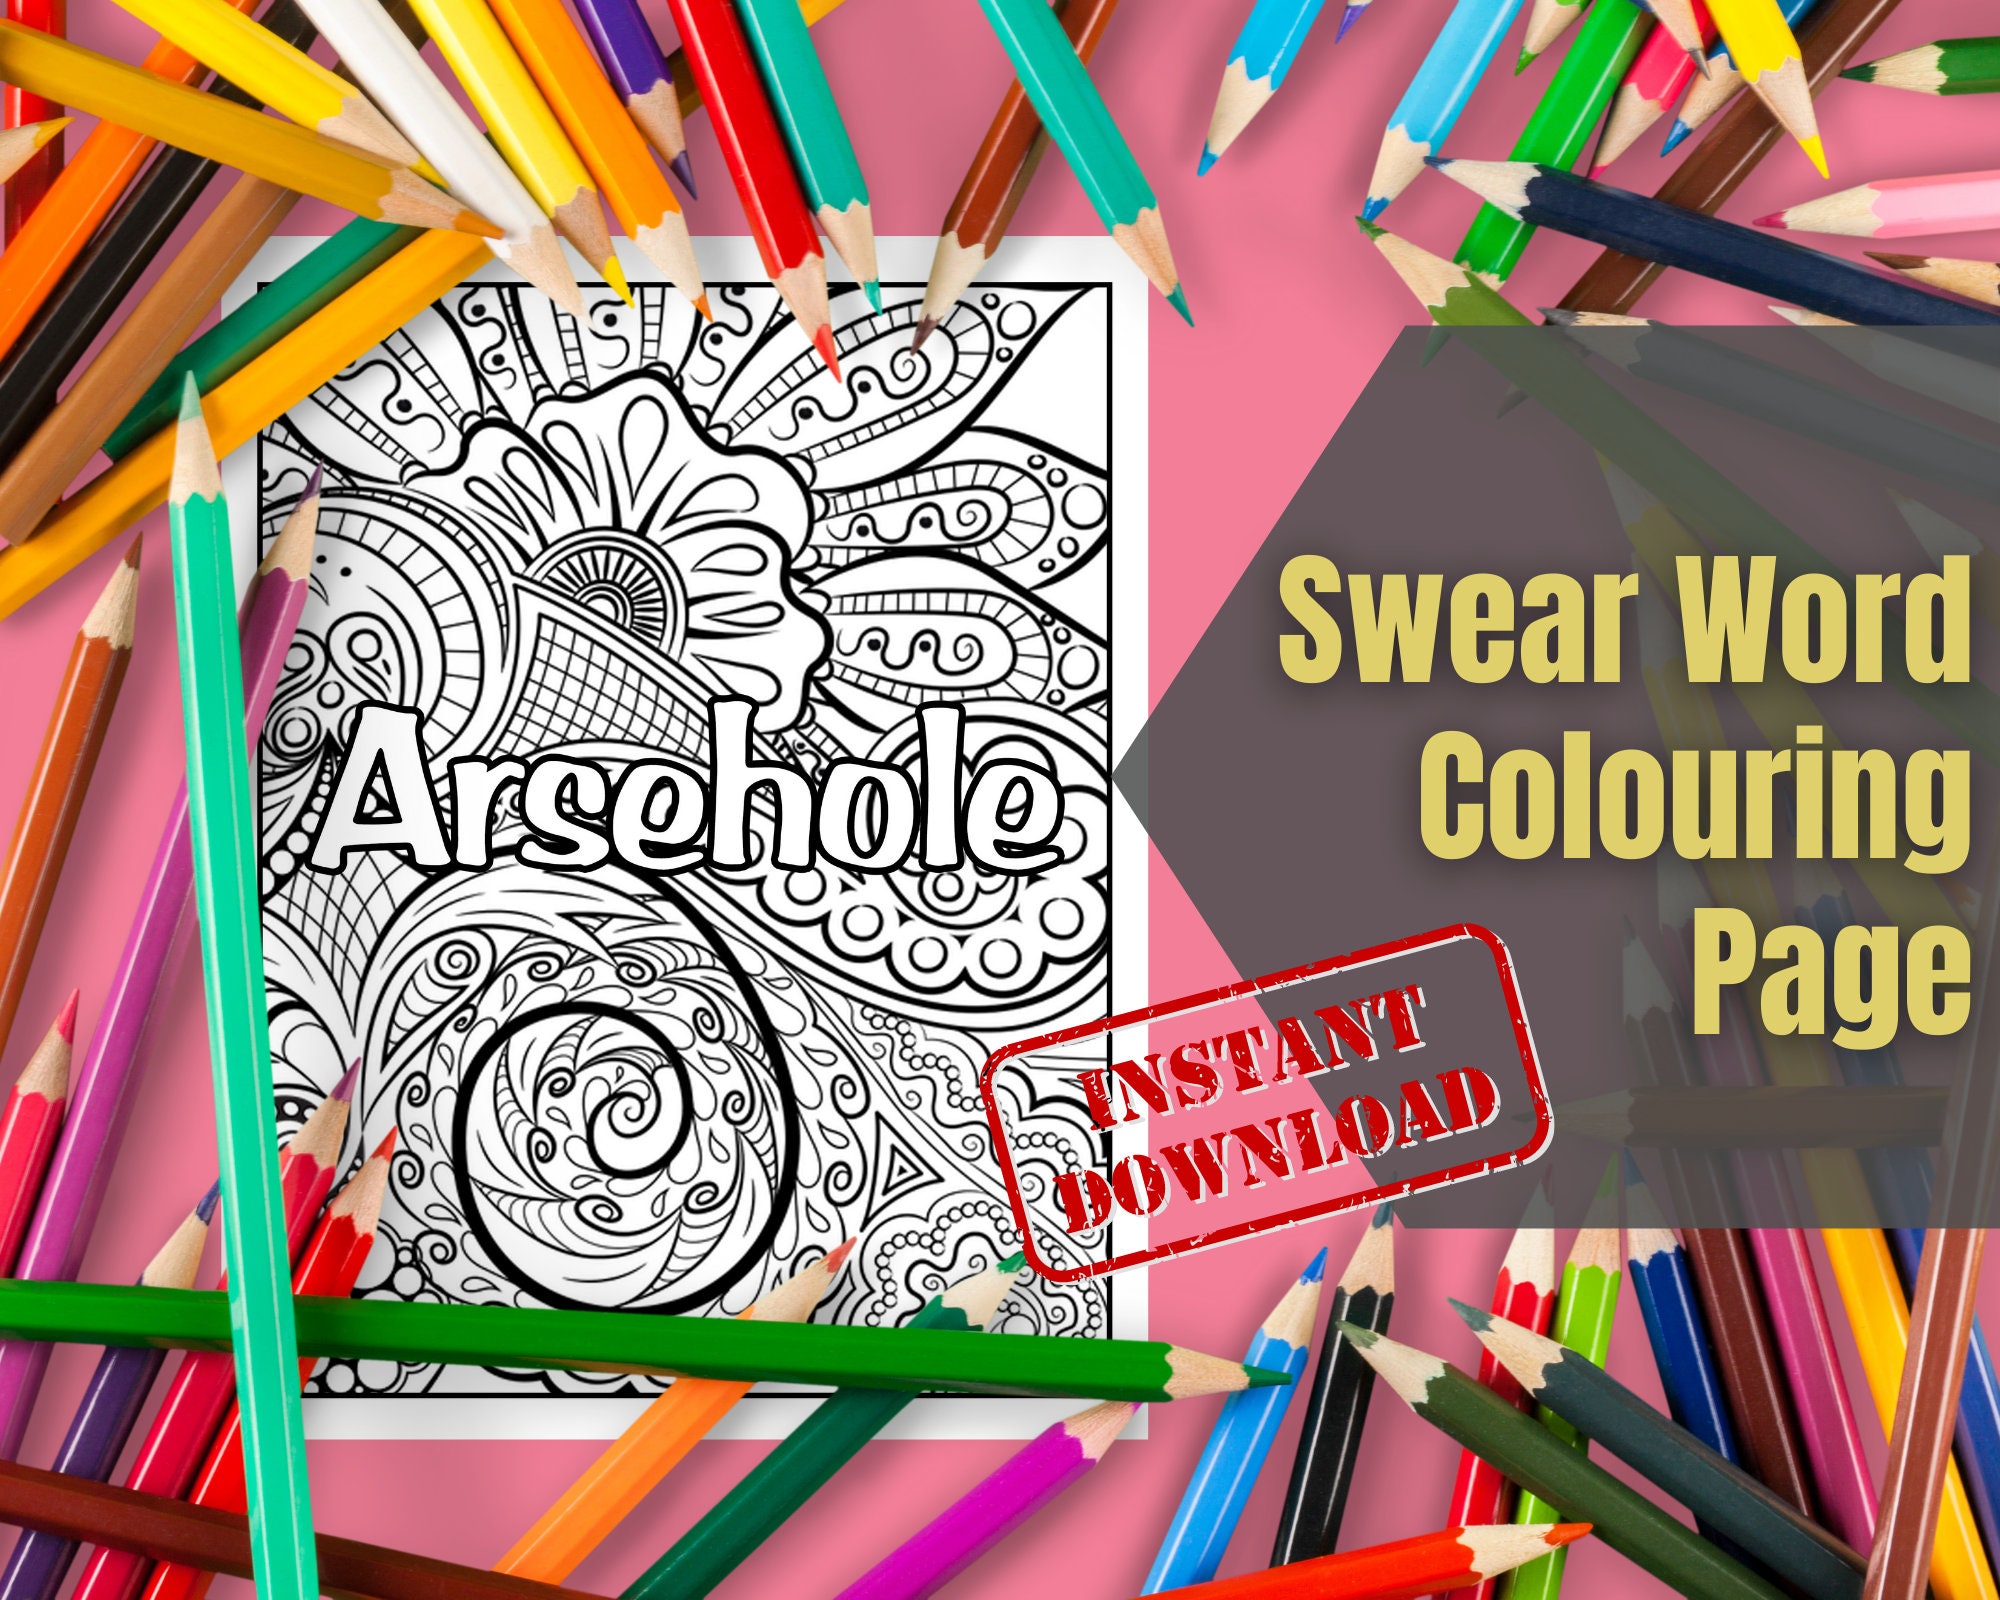 Motivational Swear Word Colouring Page Instant Download | Etsy